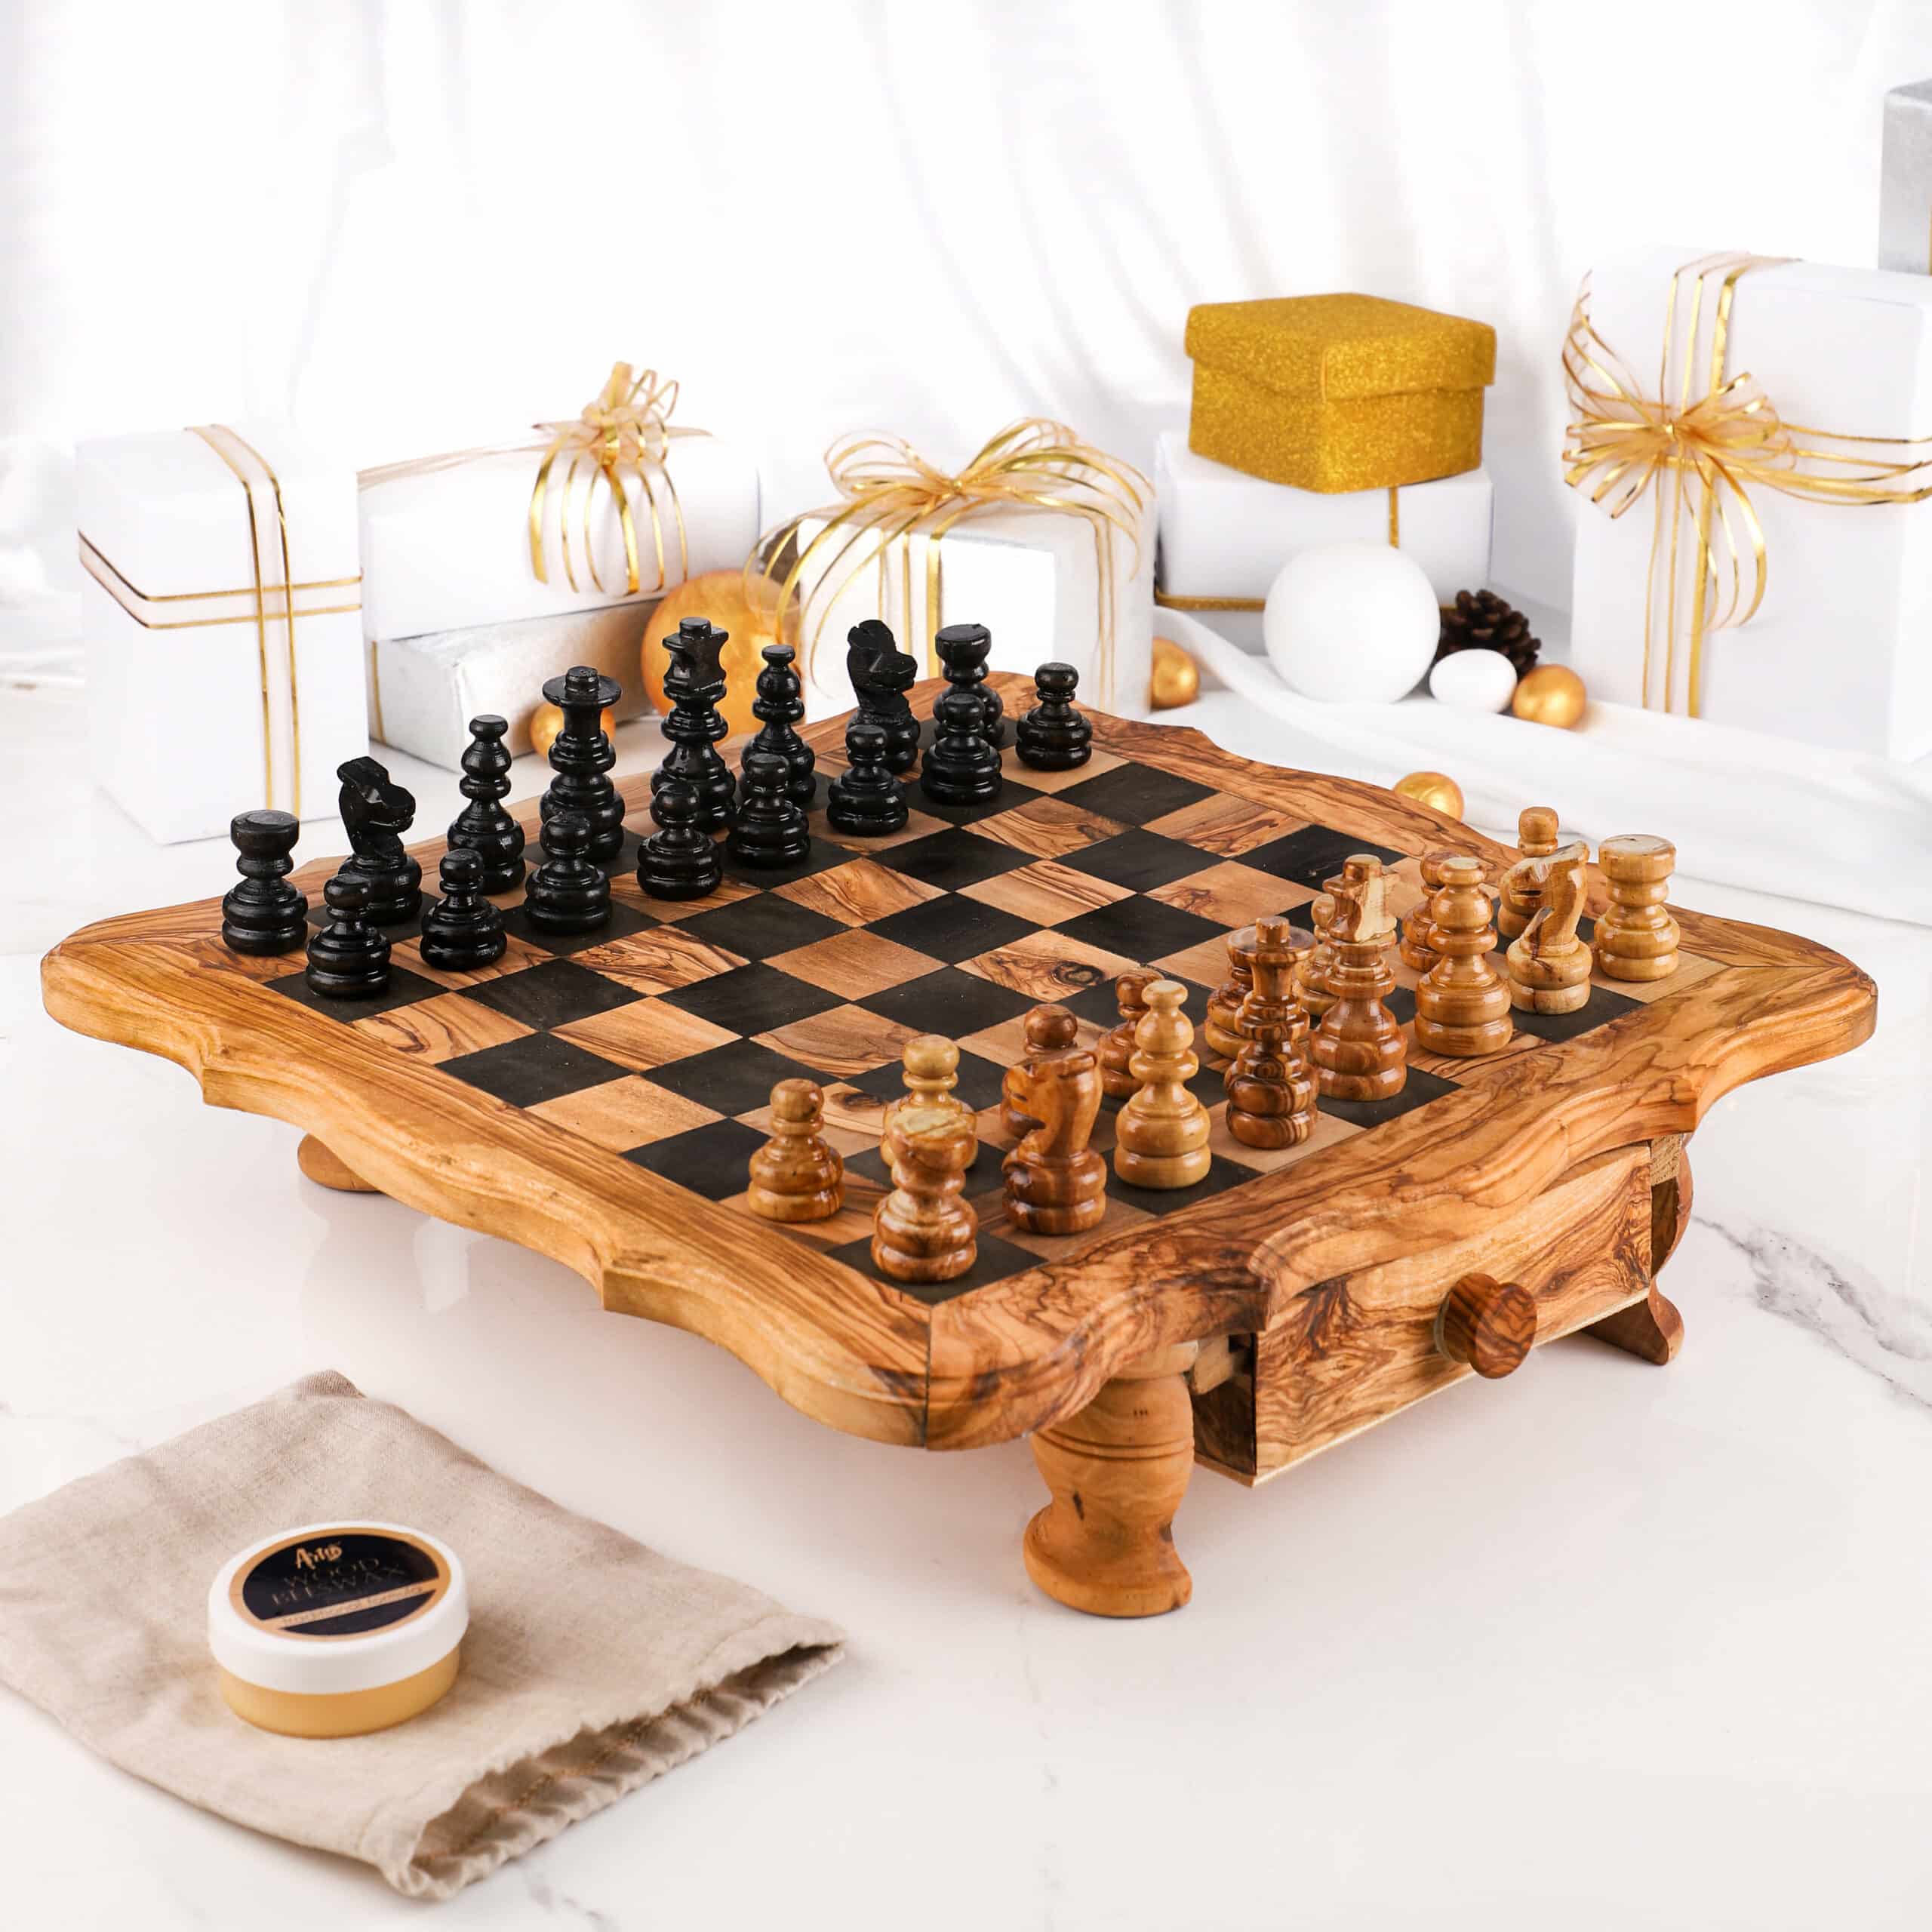 21 Hardwood Player's Chessboard with 2.25 Squares JLP, USA – Chess House